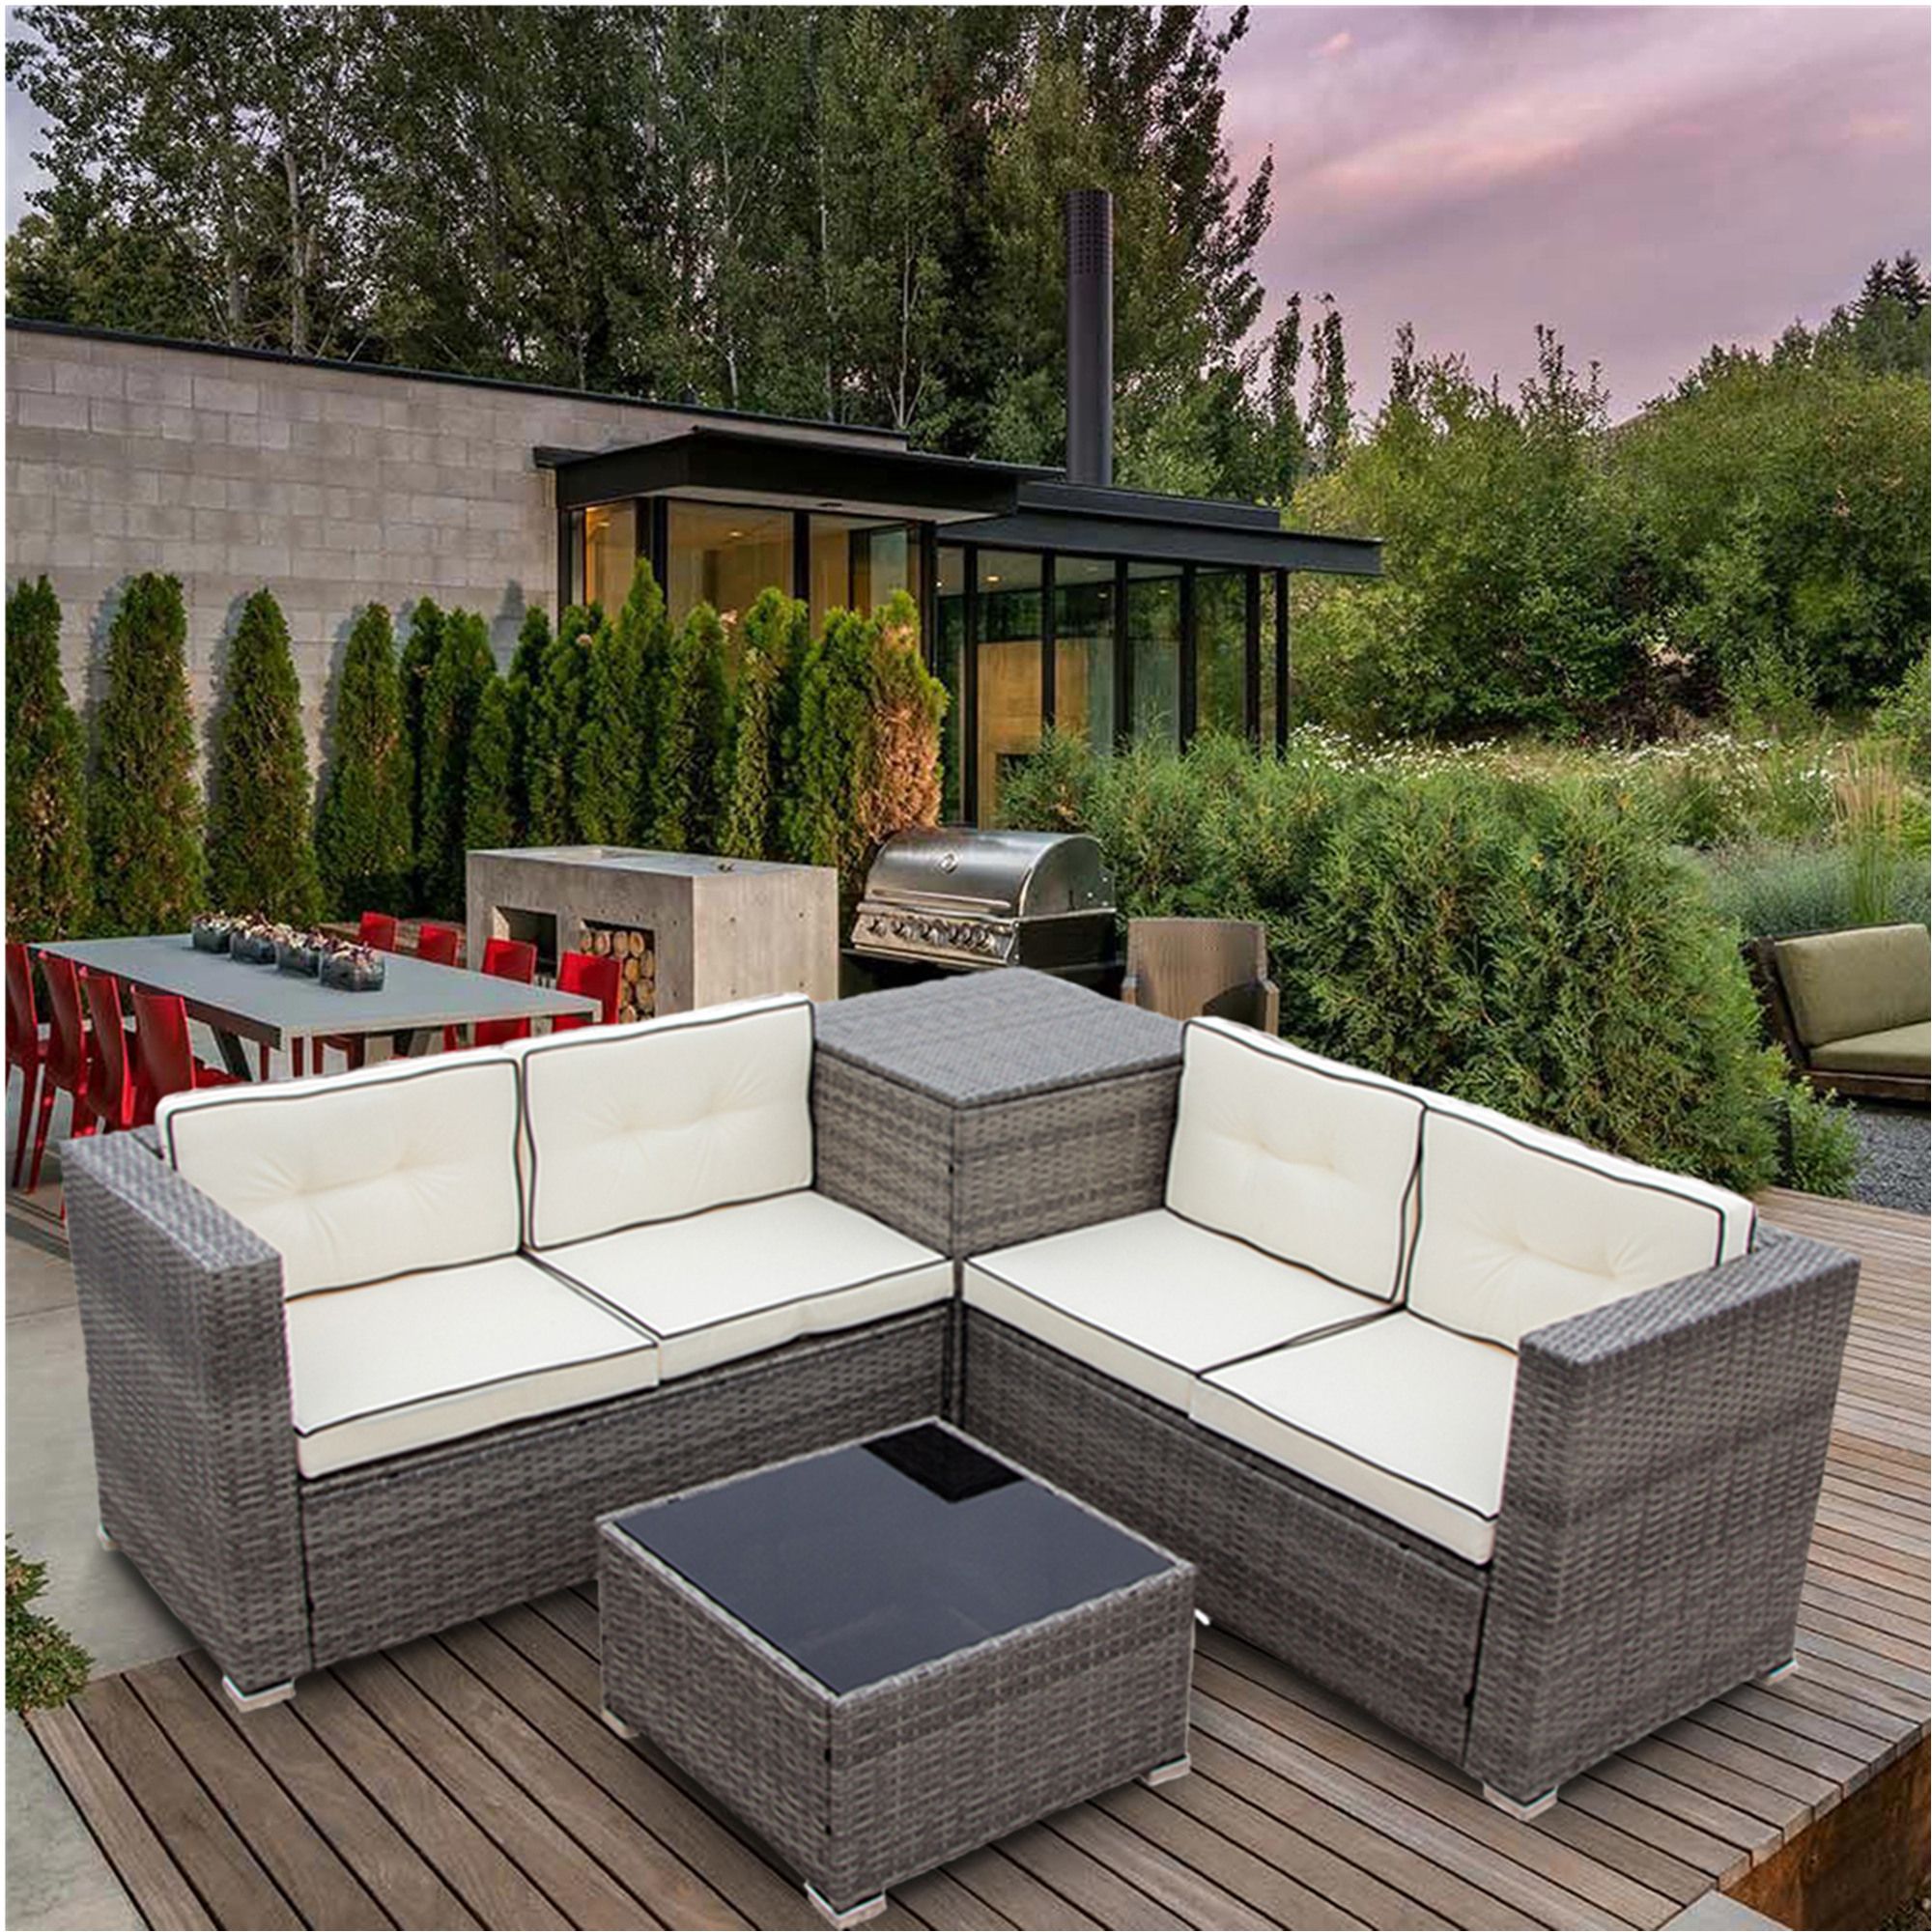 4 Piece Rattan Patio Furniture Sets Clearance, Wicker Bistro Patio Set In 4 Piece Outdoor Seating Patio Sets (View 8 of 15)